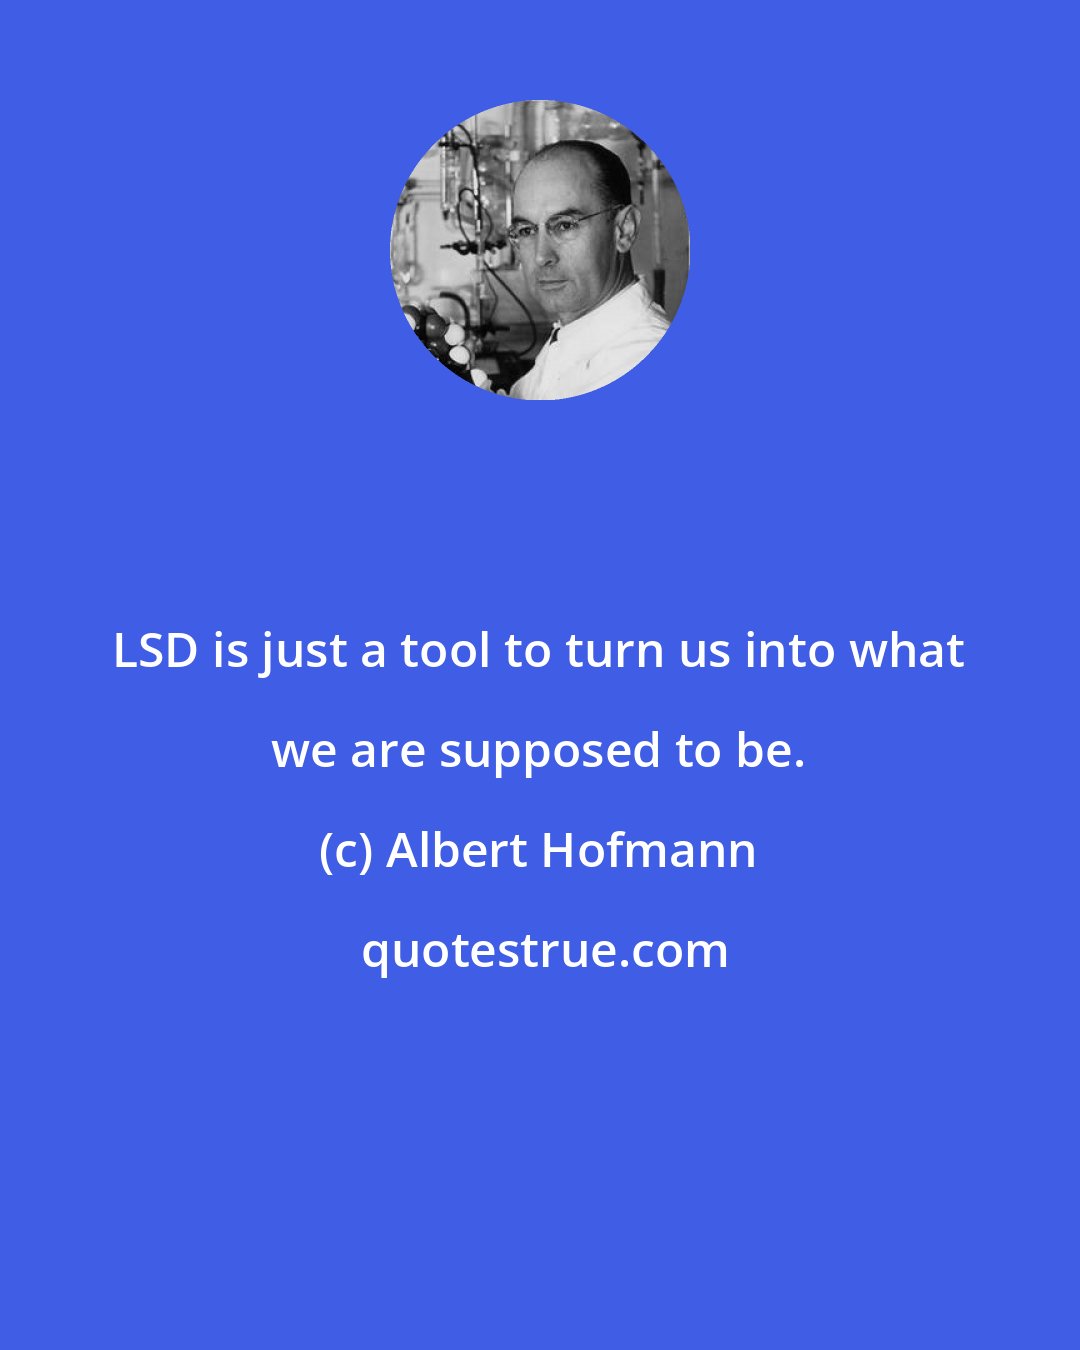 Albert Hofmann: LSD is just a tool to turn us into what we are supposed to be.